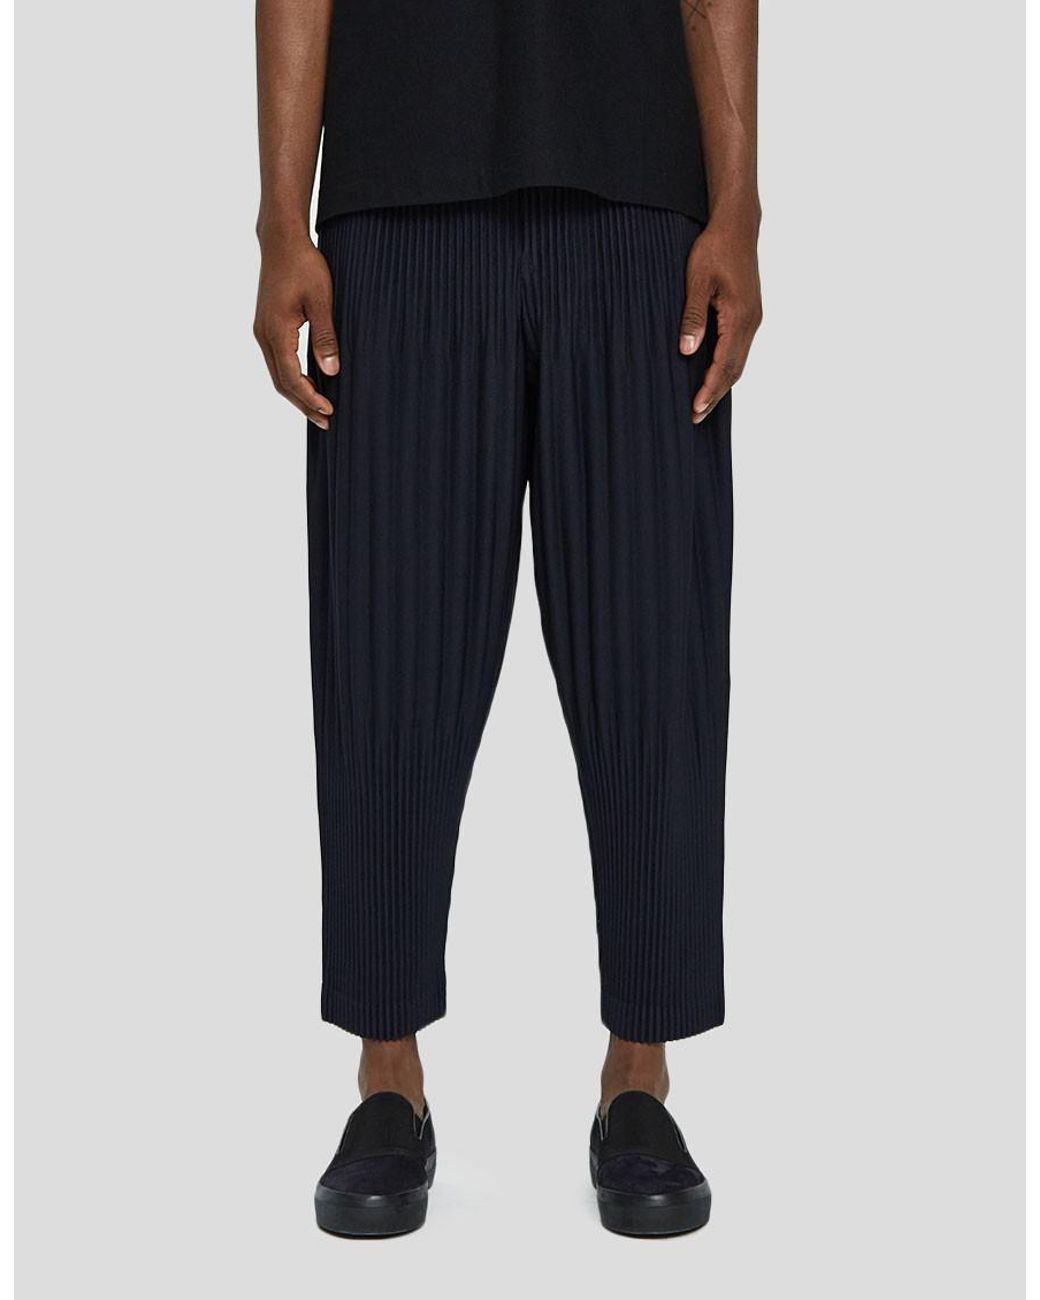 Homme Plissé Issey Miyake Basic Pleated Pants in Blue for Men - Lyst